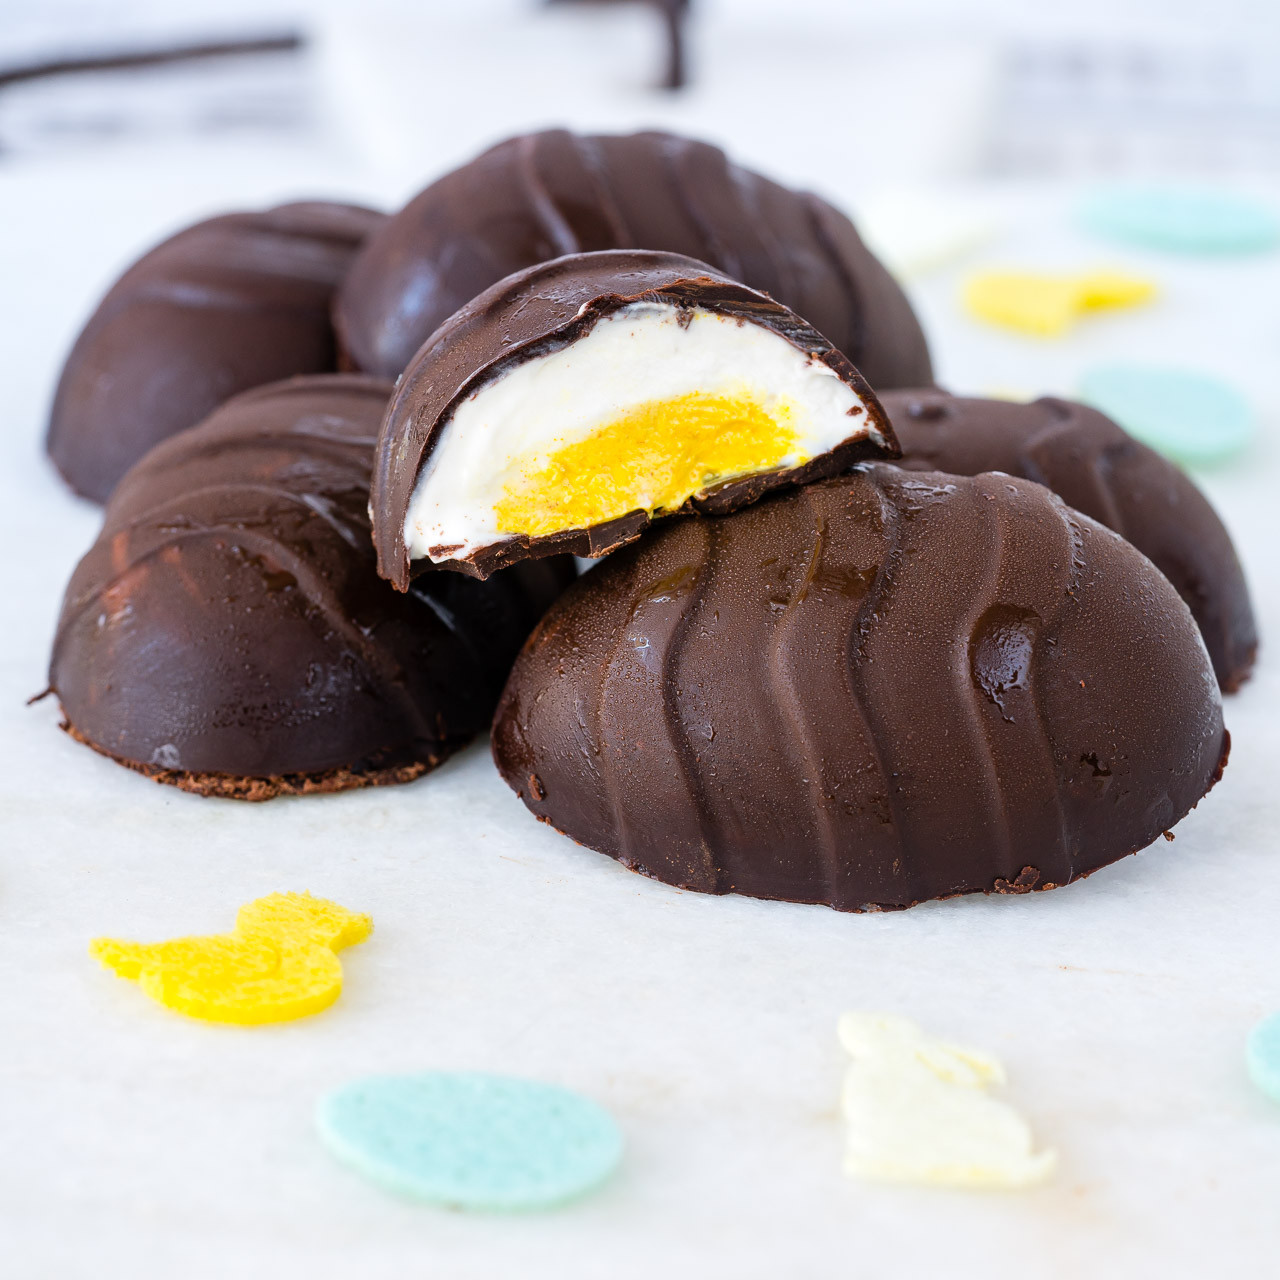 Chocolate Easter Egg Recipe
 Get Creative with these Healthy Chocolate Yogurt filled